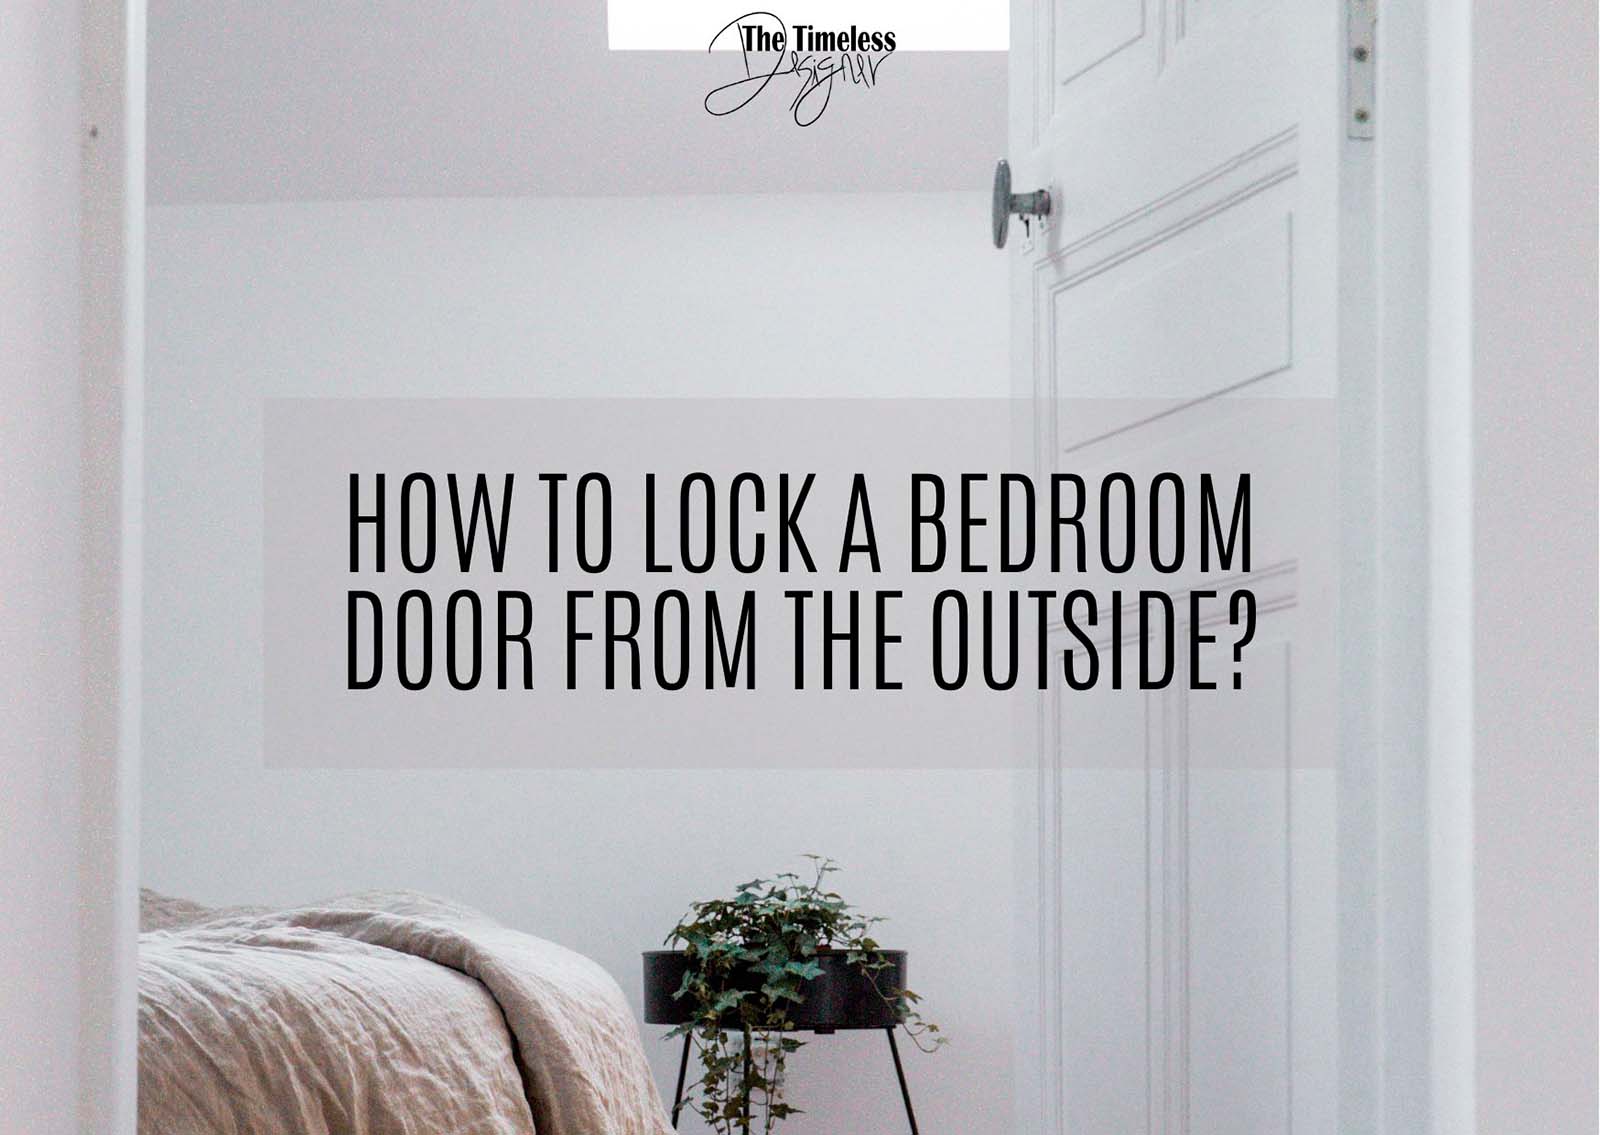 How To Lock A Bedroom Door From The Outside Image